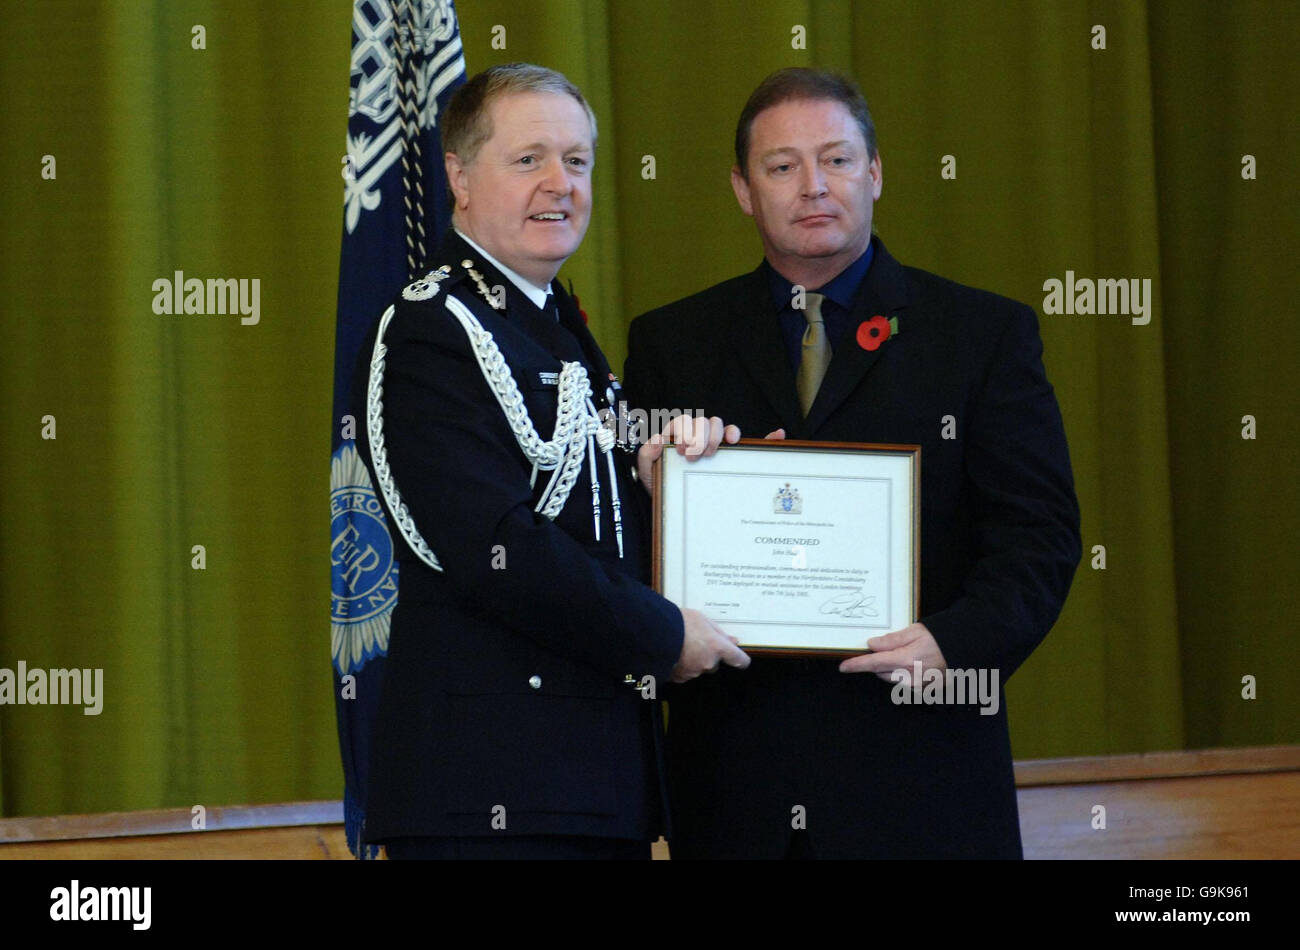 John Hall receives his award from Met Police Commissioner Sir Ian Blair at the Metropolitan Police Service Commissioner Commendation Ceremony held at Peel Centre in Hendon, North London. Stock Photo